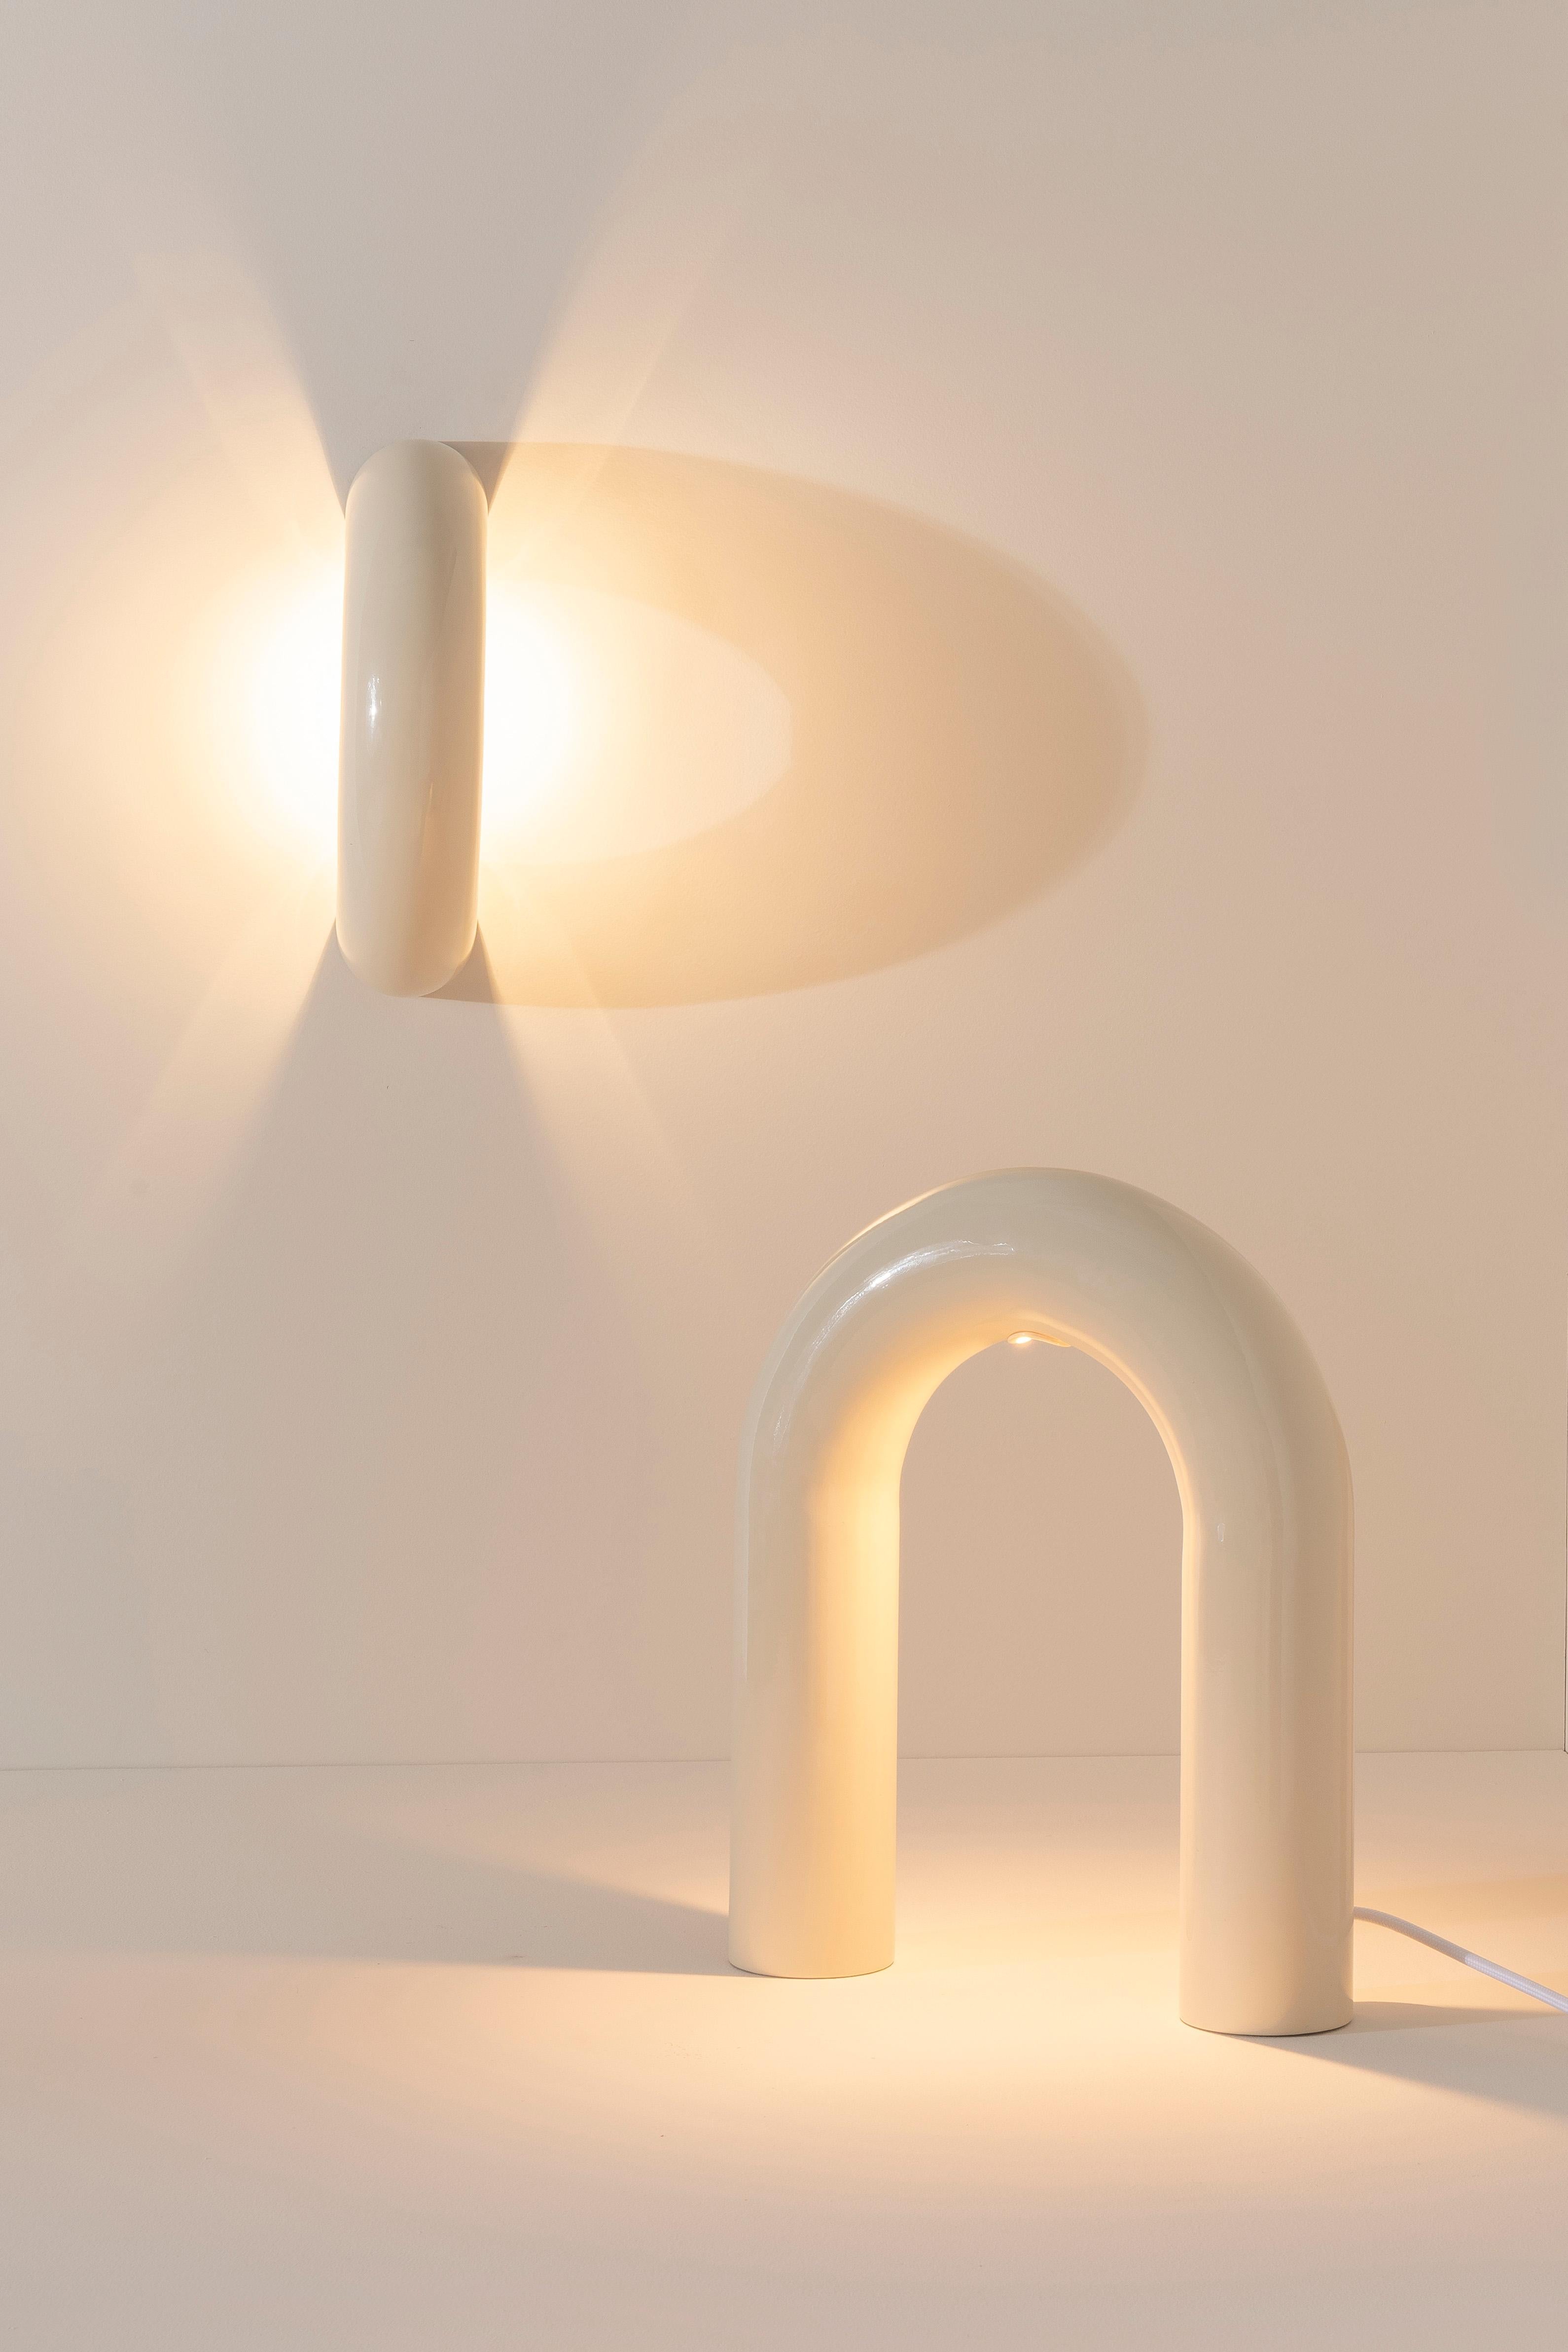 Arco Lamp, Gold, by RAIN, Contemporary Wall Lamp, Stainless Steel In New Condition For Sale In Sao Paulo, SP